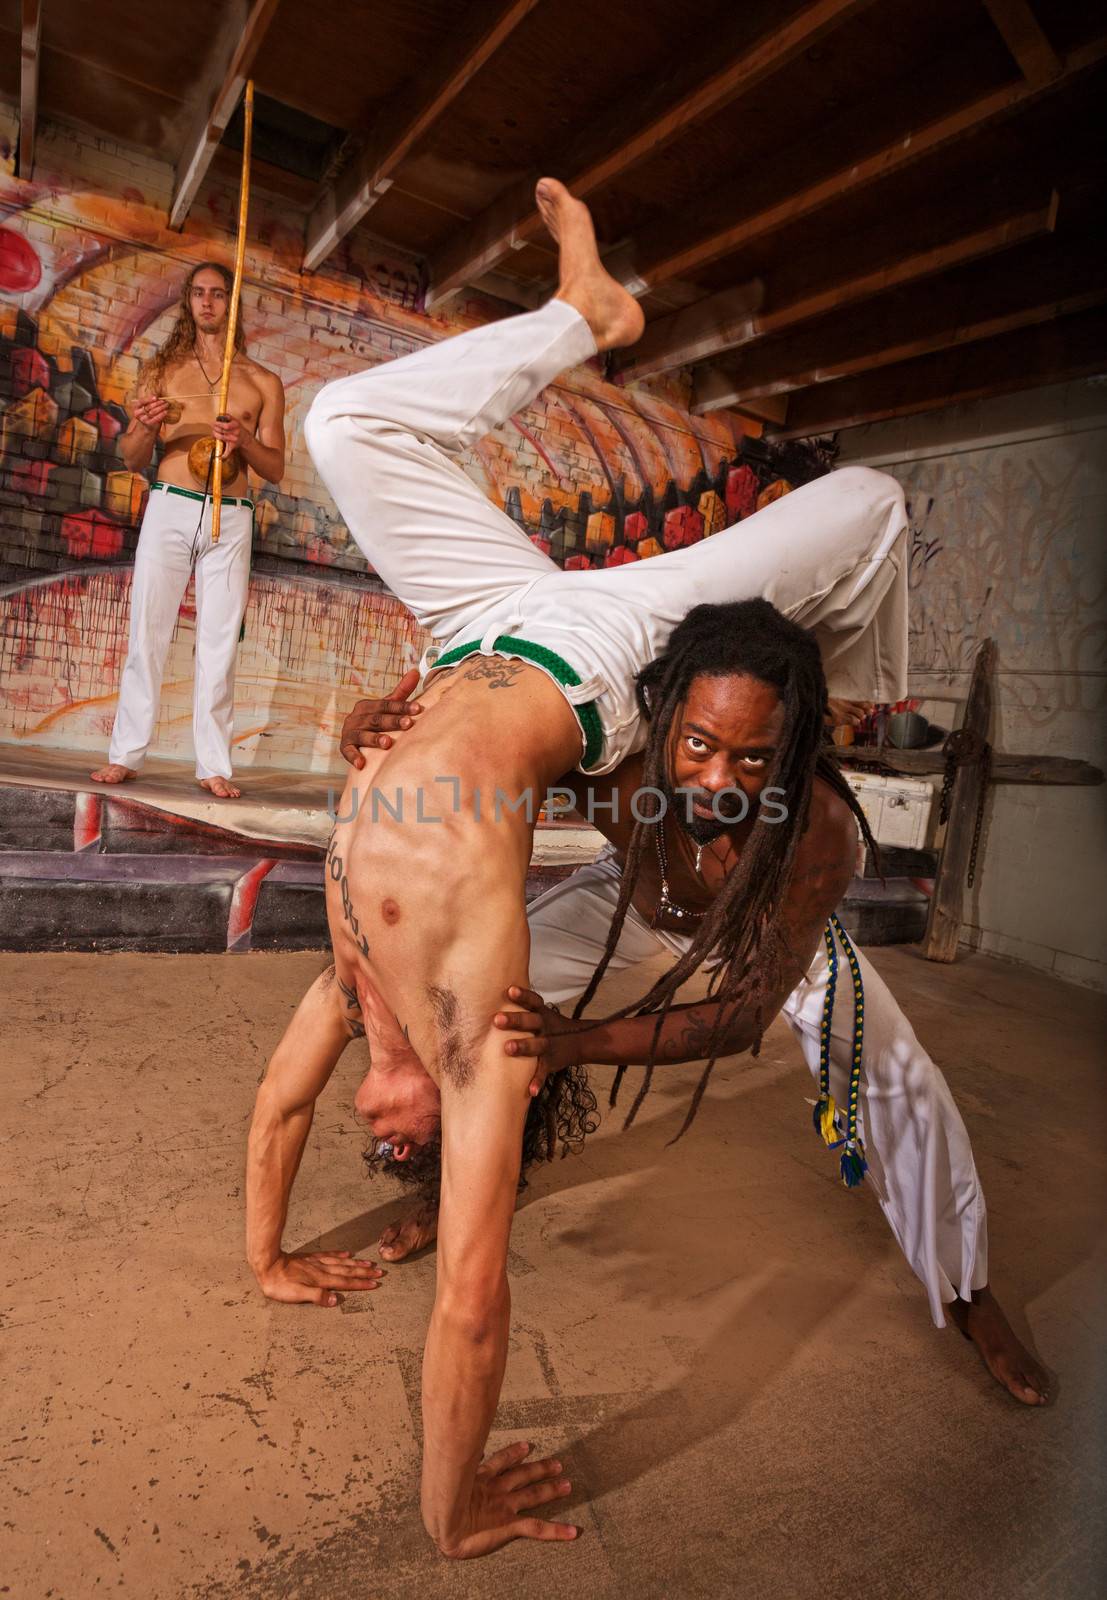 Helping Capoeira Partner with Handstand by Creatista